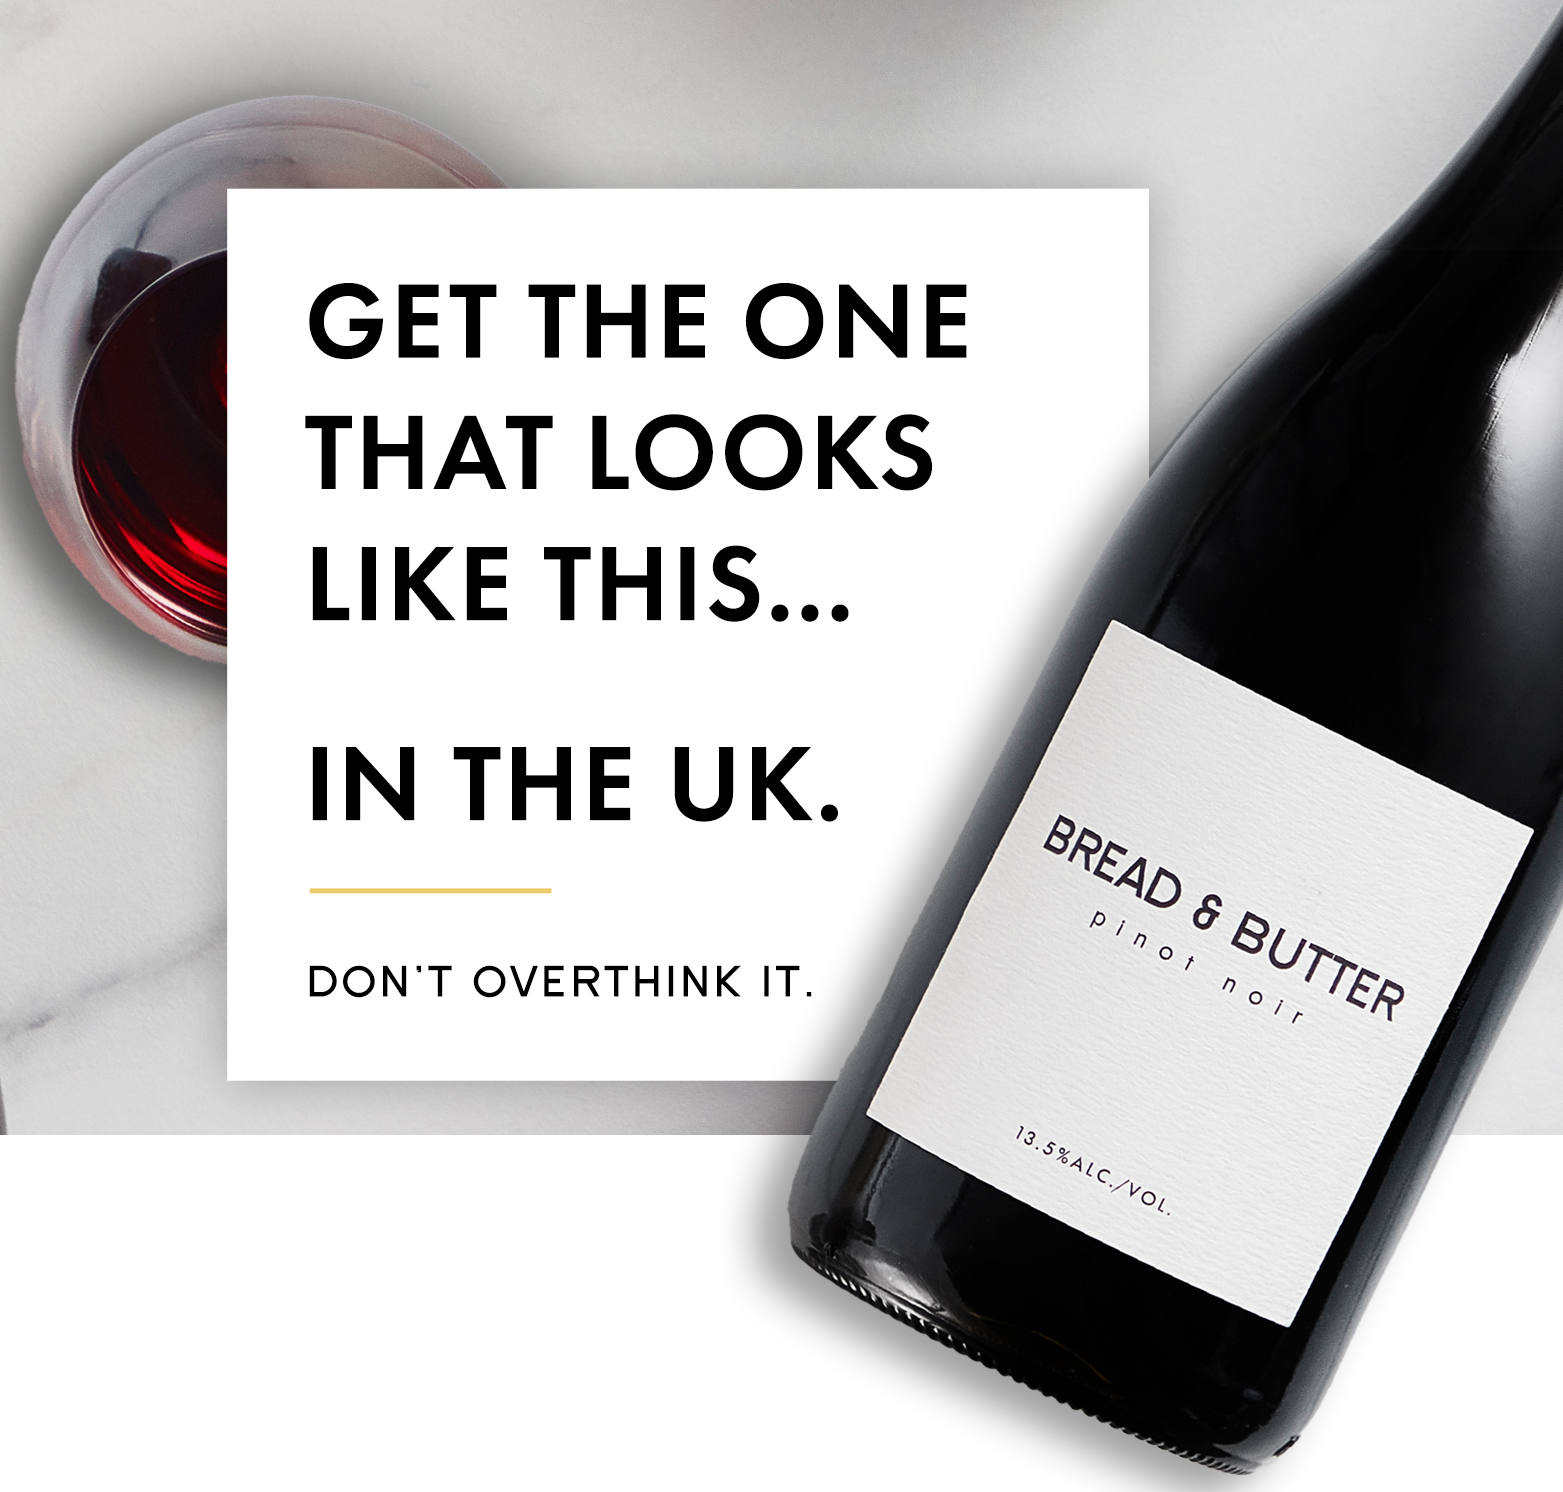 Bread & Butter Pinot Noir with copy, "Get the one that looks like this...in the UK. Don't overthink it."